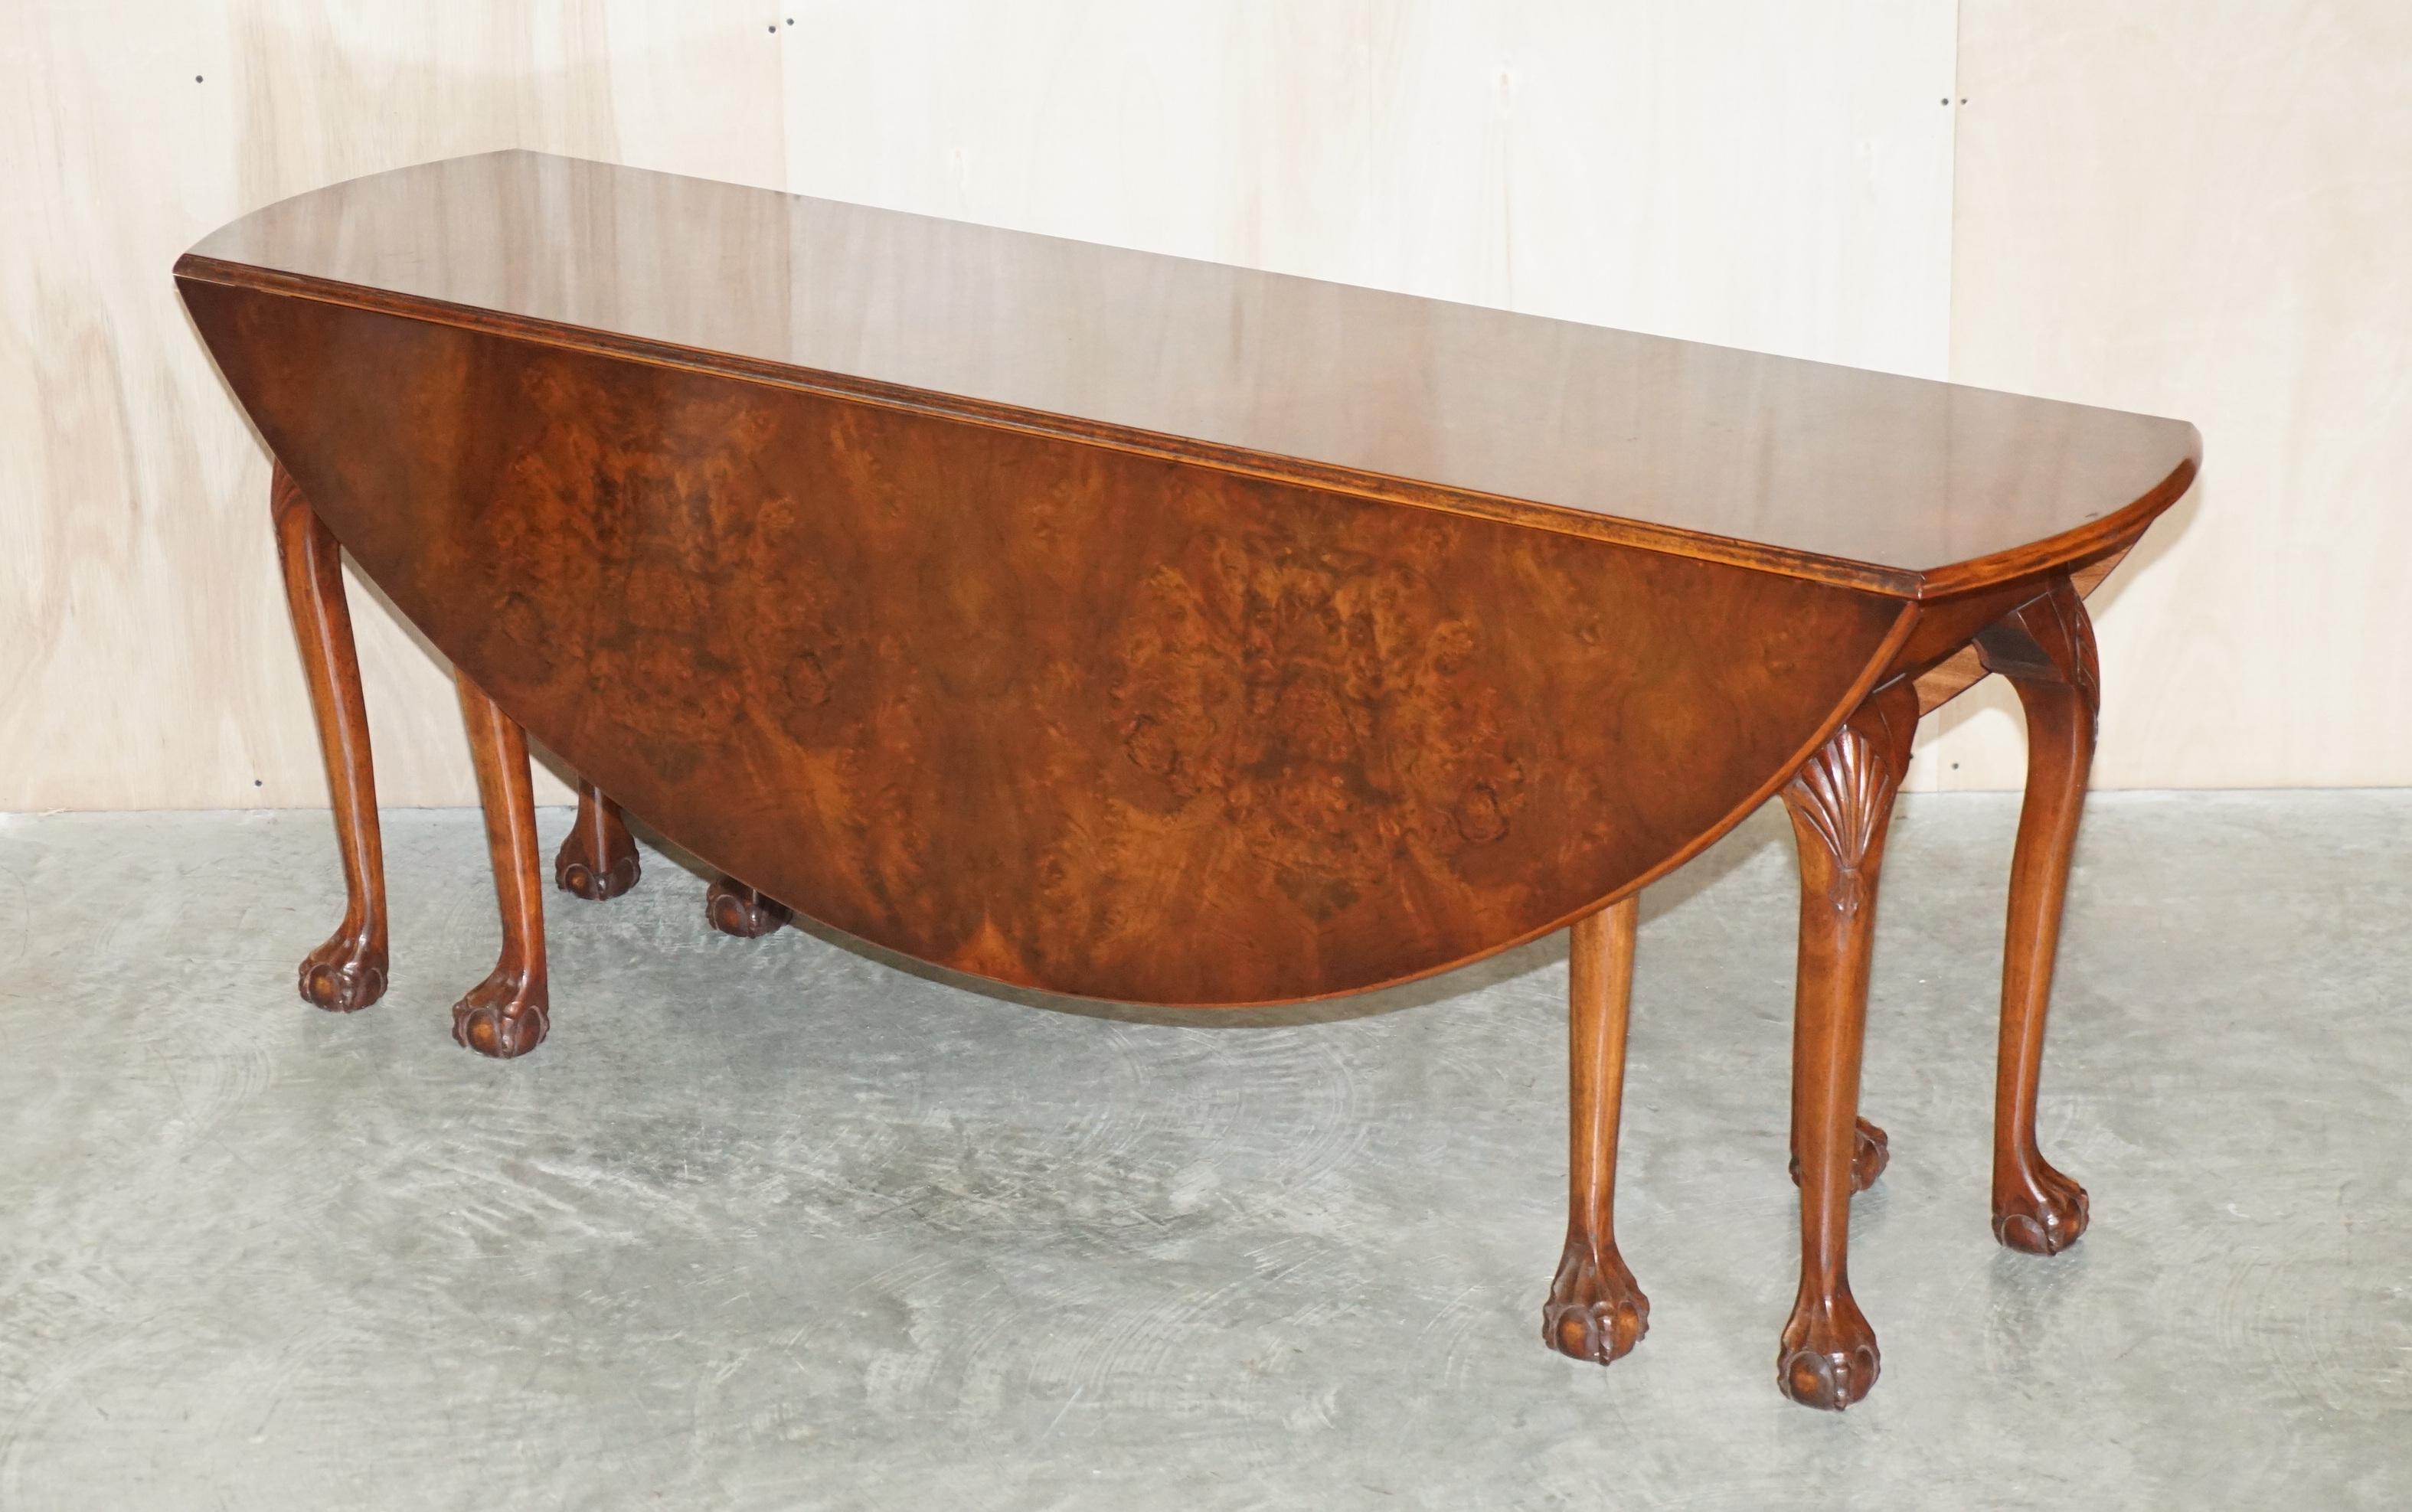 We are delighted to offer for sale this absolutely stunning antique late Victorian circa 1880 burr walnut Hunt or Harvest table, also known as a wake table in the Georgian Irish style with Chippendale Claw & ball legs

A very good looking and well